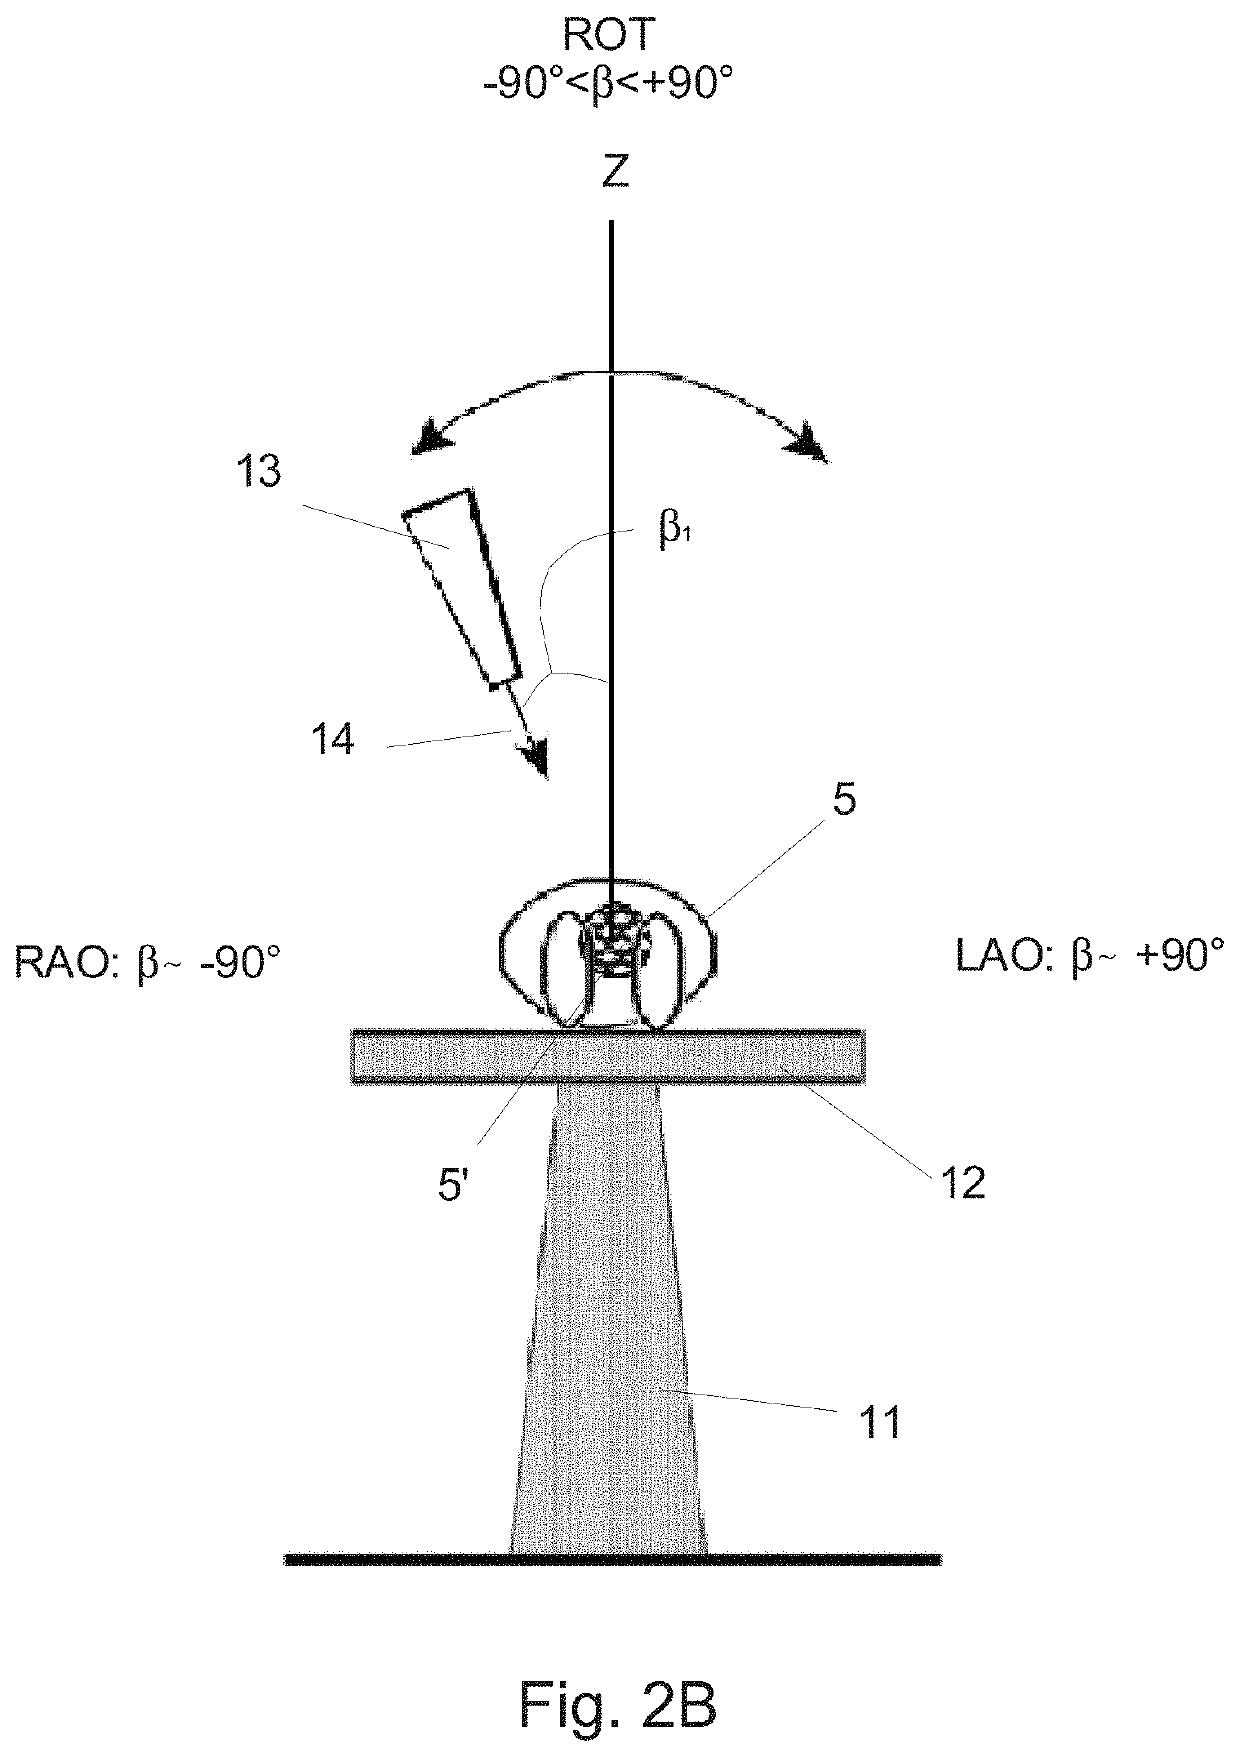 Method and apparatus for reconstructing a three-dimensional representation of a target volume inside an animal or human body